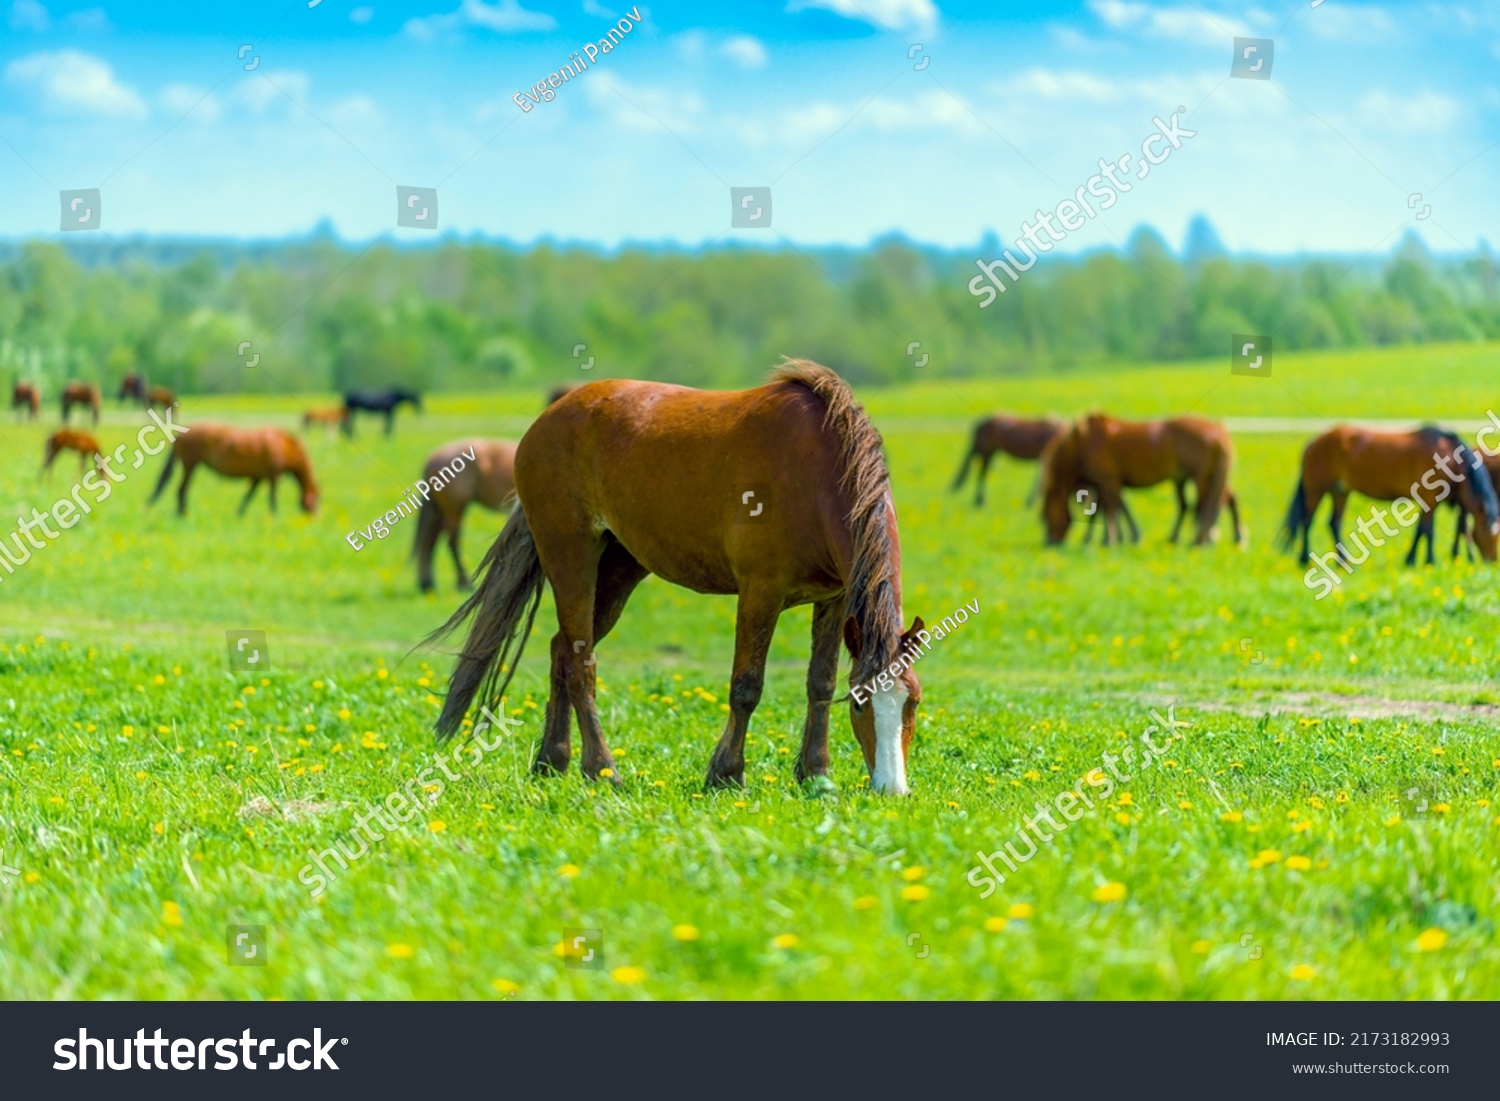 A beautiful brown horse grazes on a flowering sunny meadow in a field along with a herd of horses. Purebred mare on pasture in summer. Landscape, wallpaper. #2173182993